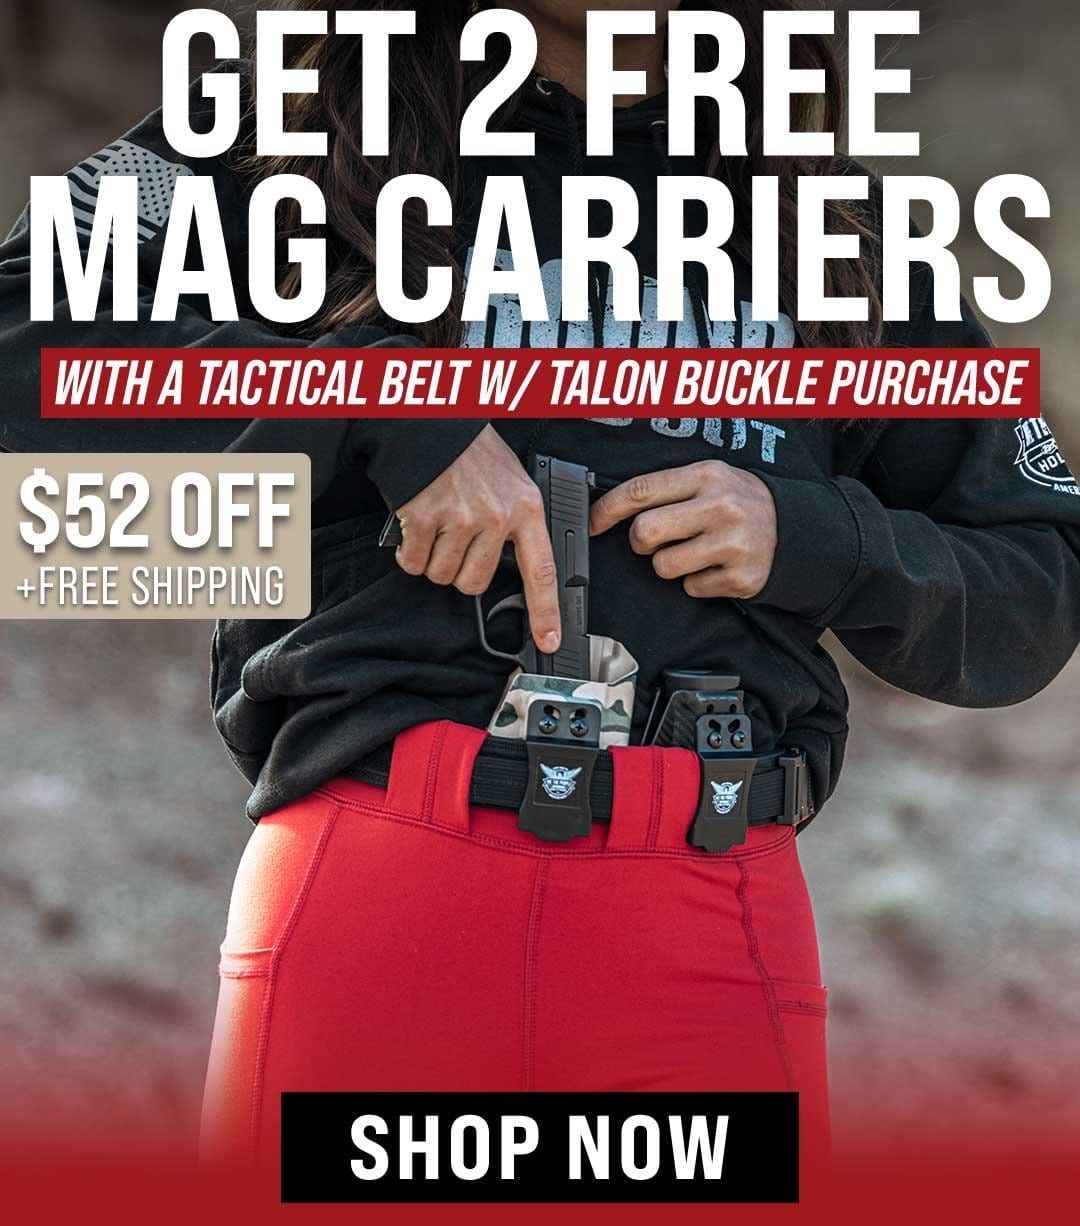 Get 2 FREE Mag Carriers for a limited time